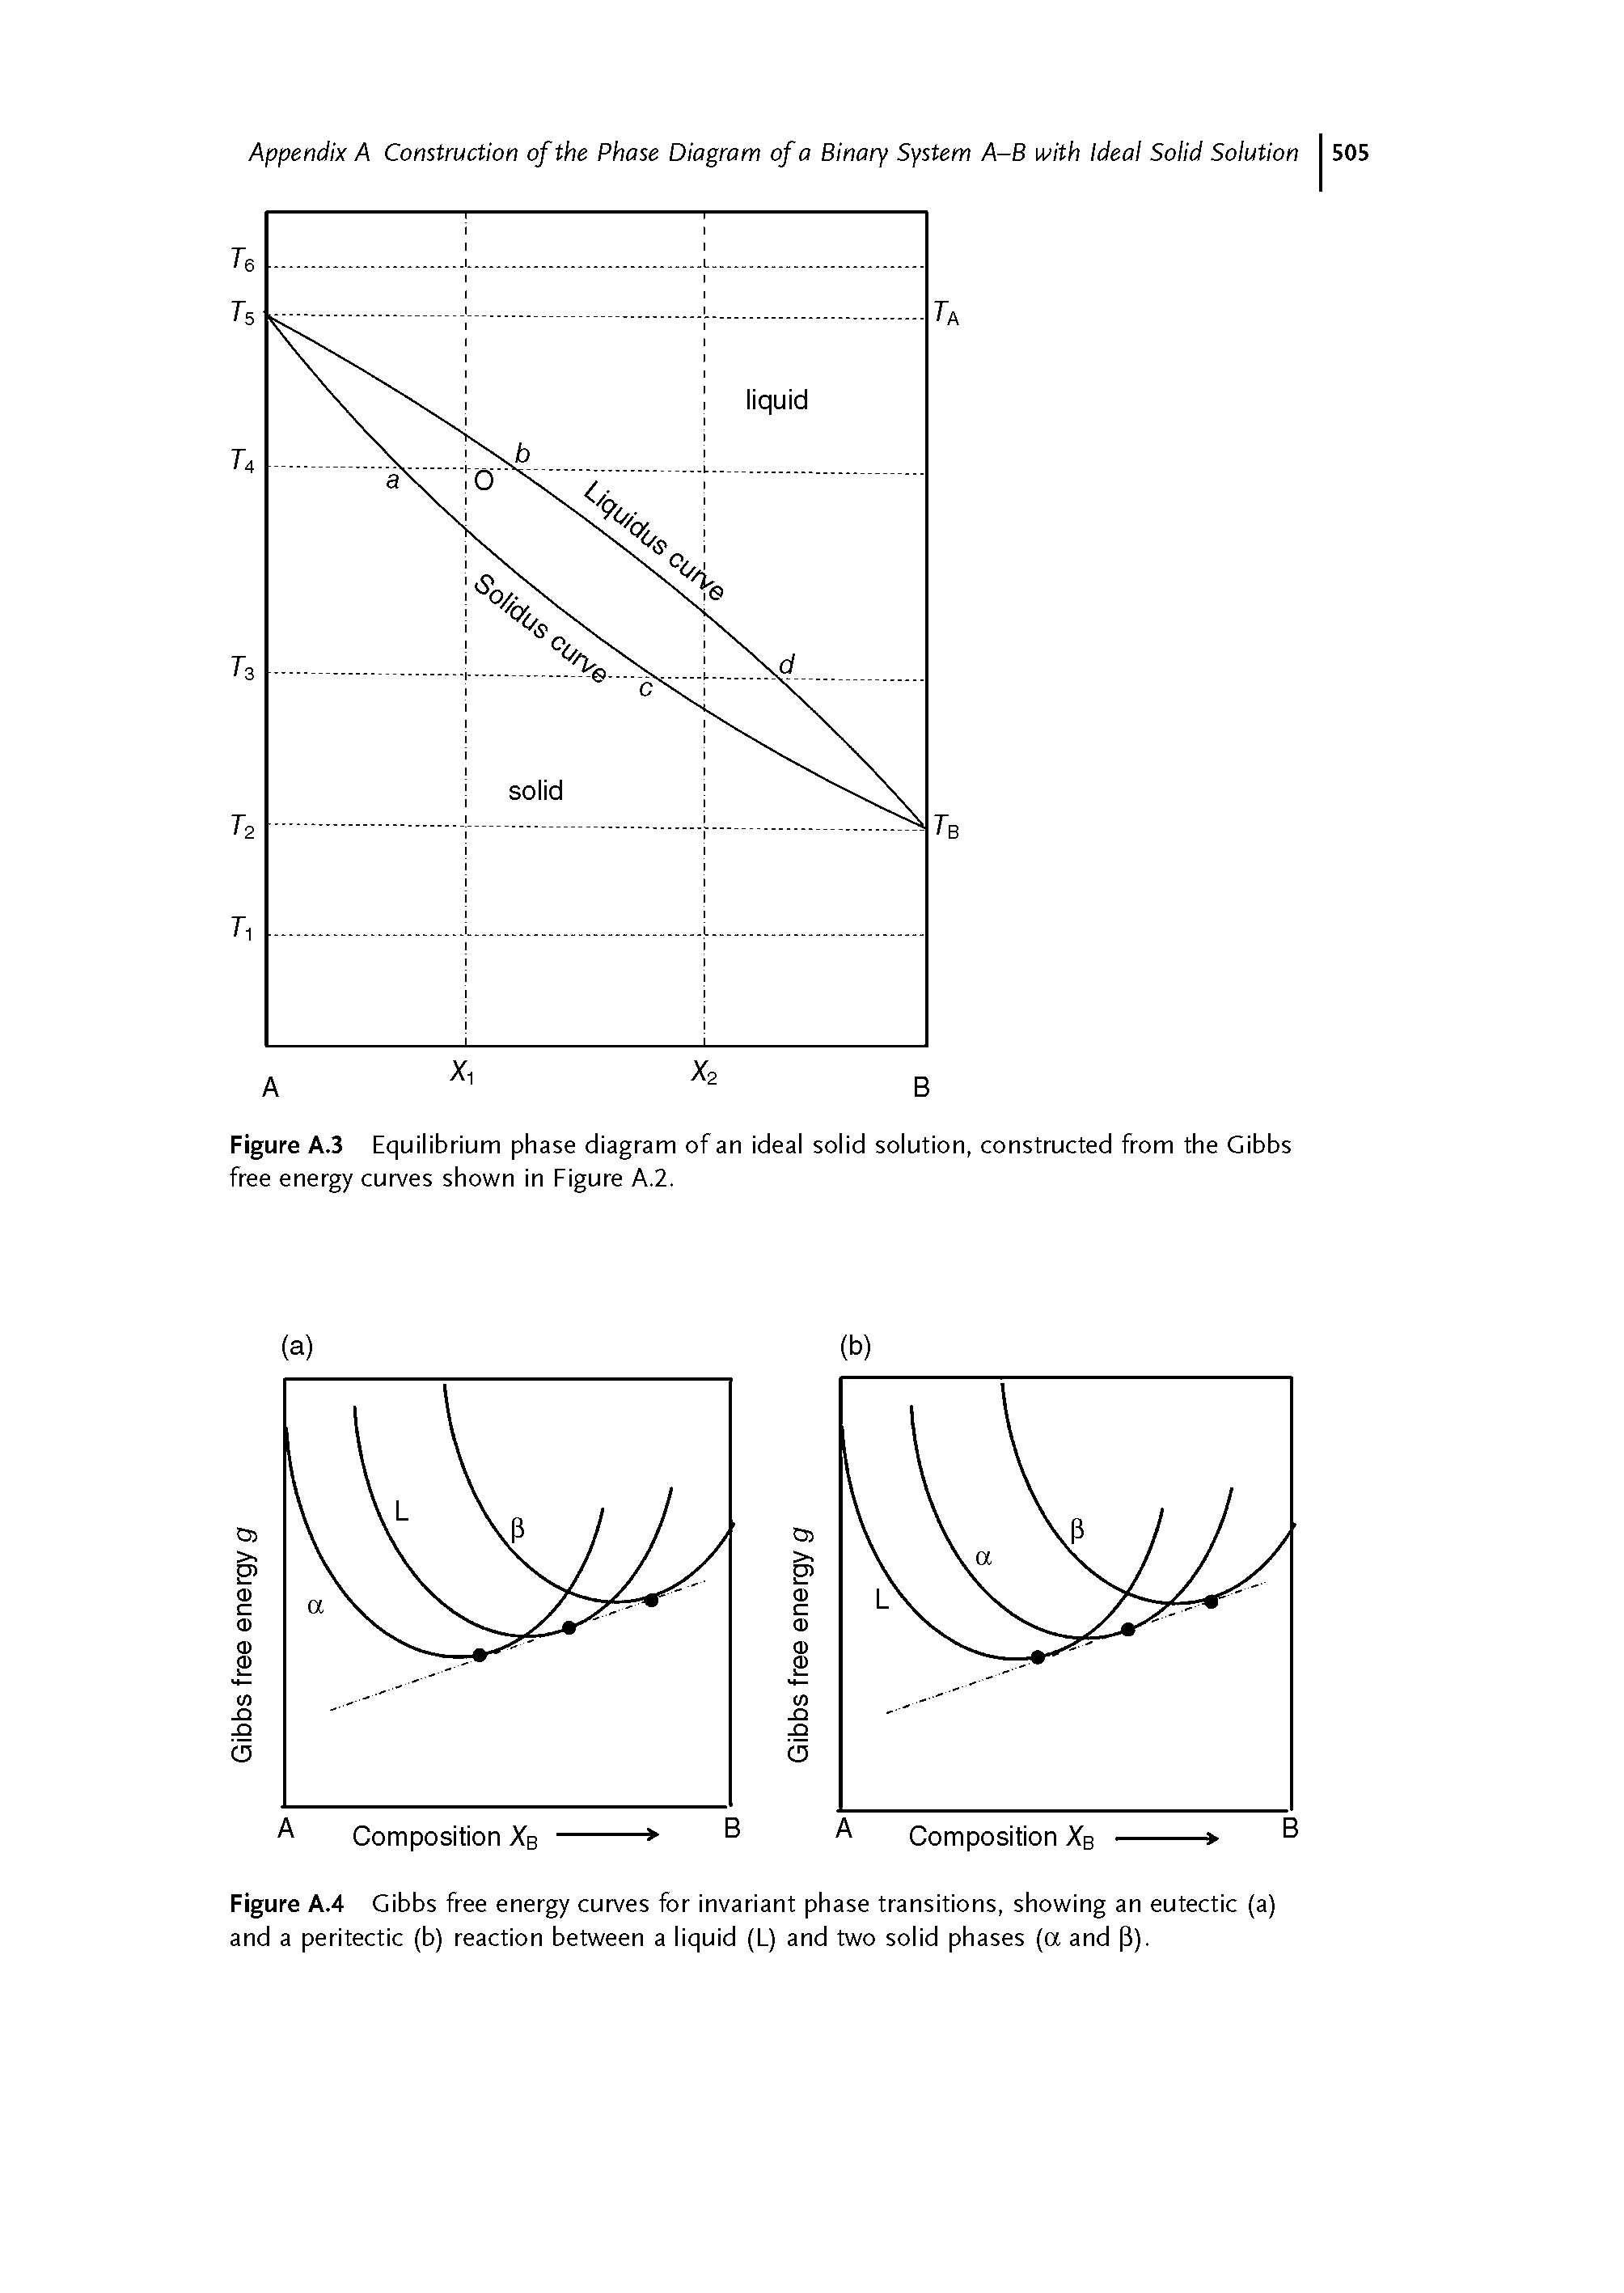 Figure A.3 Equilibrium phase diagram of an ideal solid solution, constructed from the Gibbs free energy curves shown in Figure A.2.